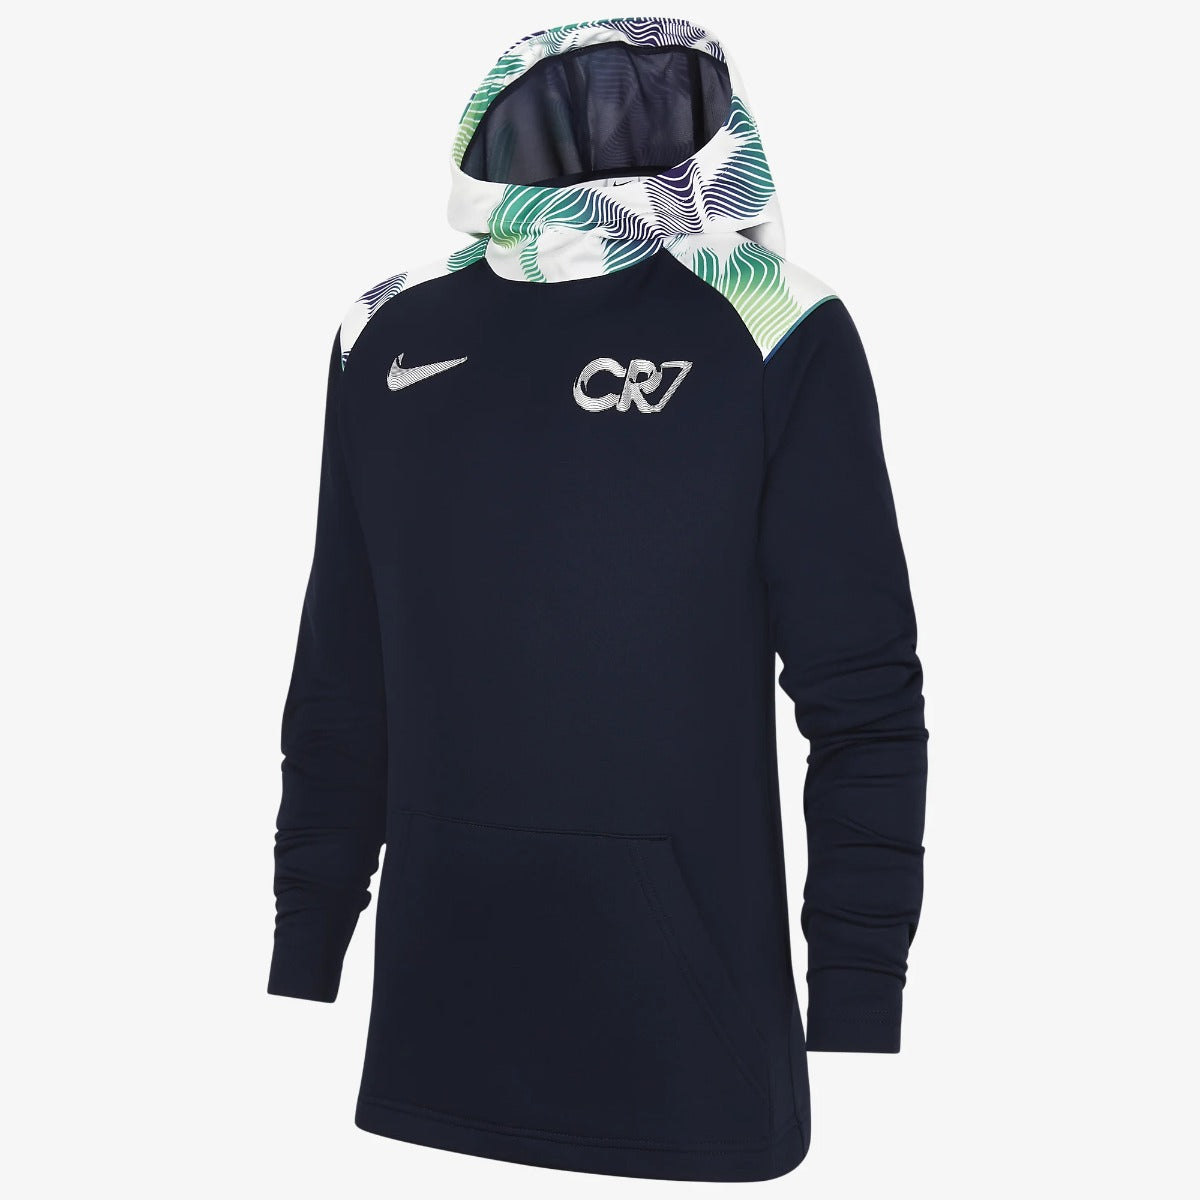 Nike Youth DF CR7 Pullover Hoodie - Obsidian-White (Front)